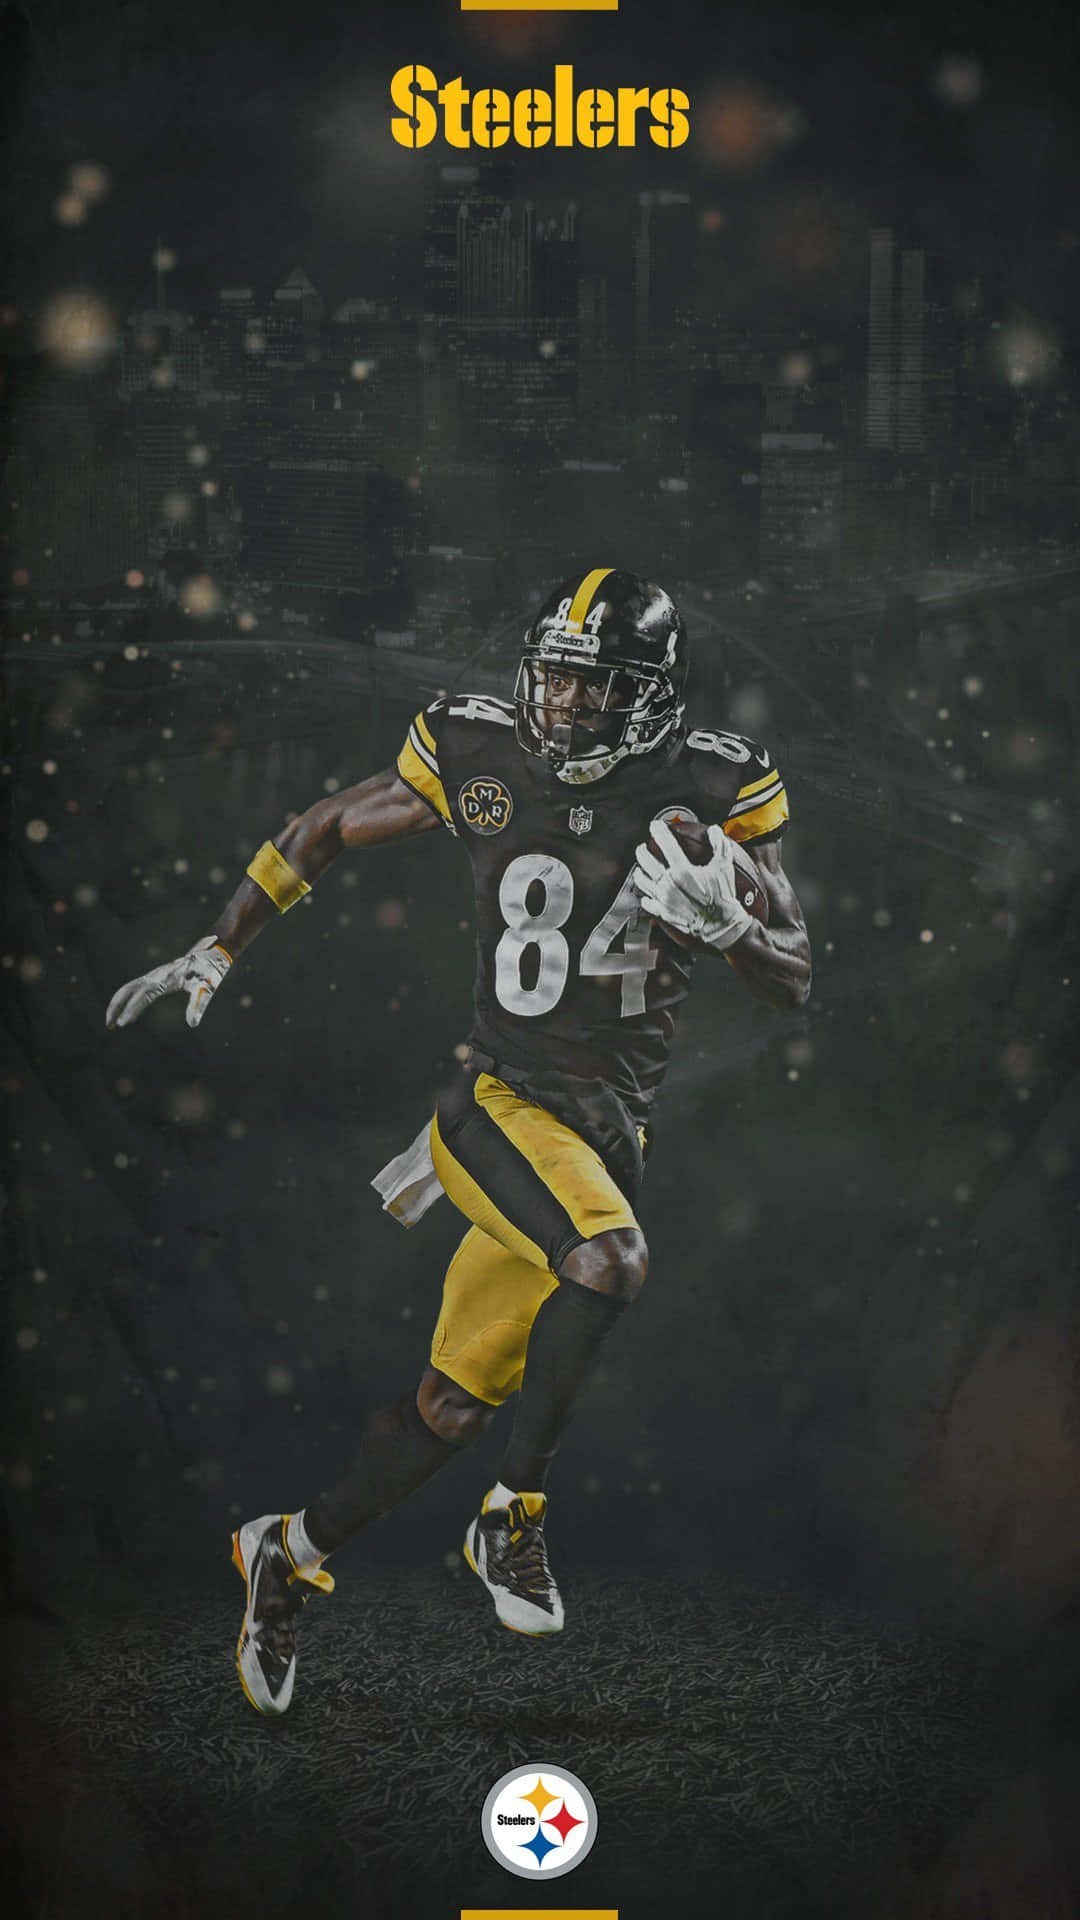 Show your team pride with a Steelers iPhone Wallpaper